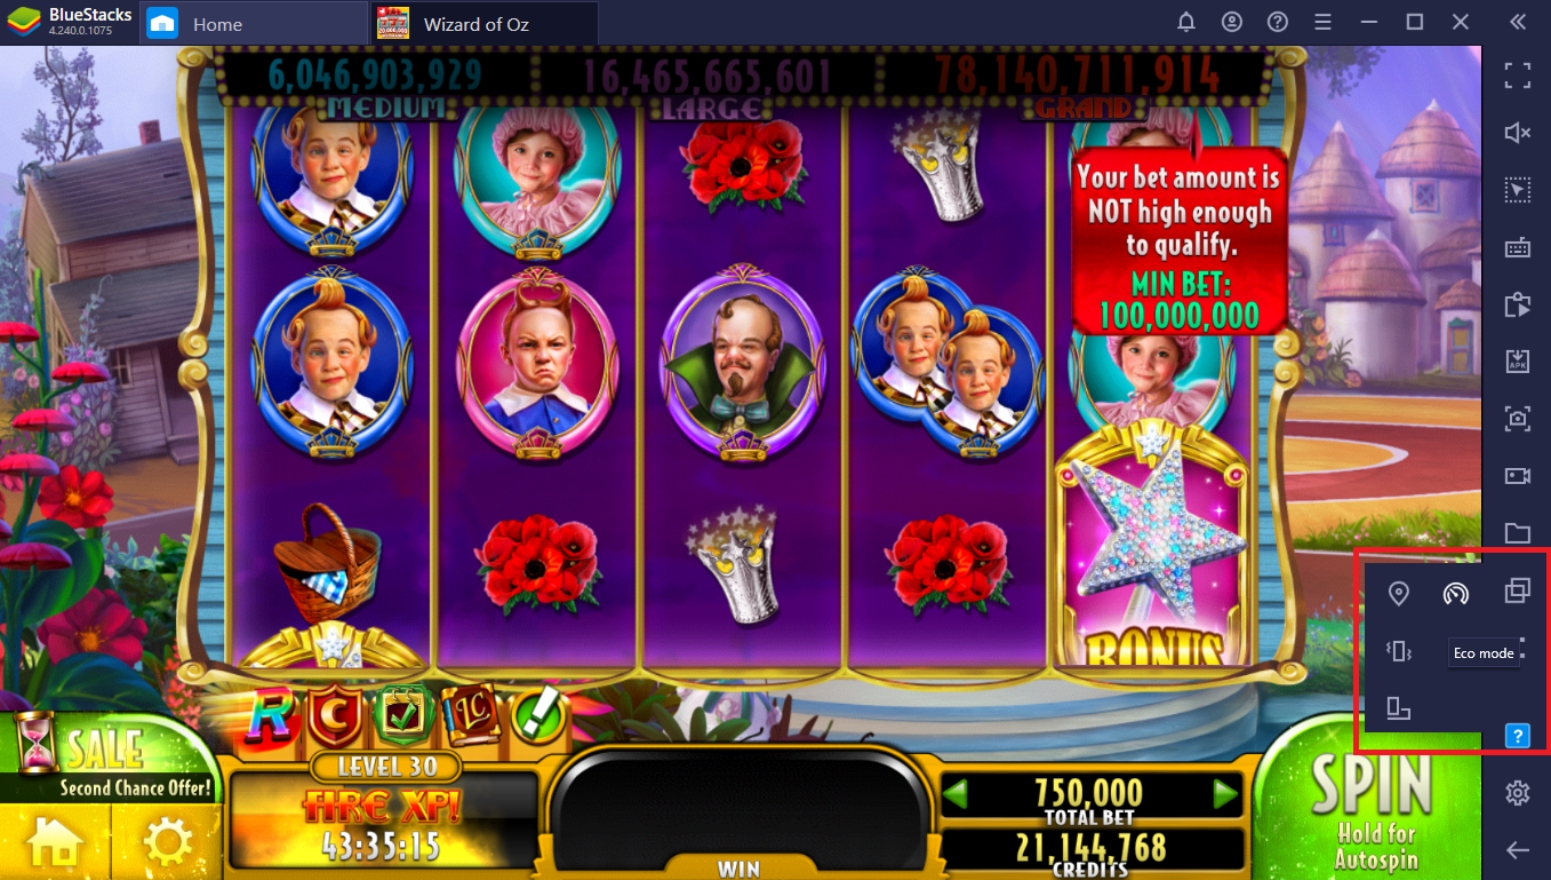 How to Play Wizard Of Oz Casino on PC With BlueStacks